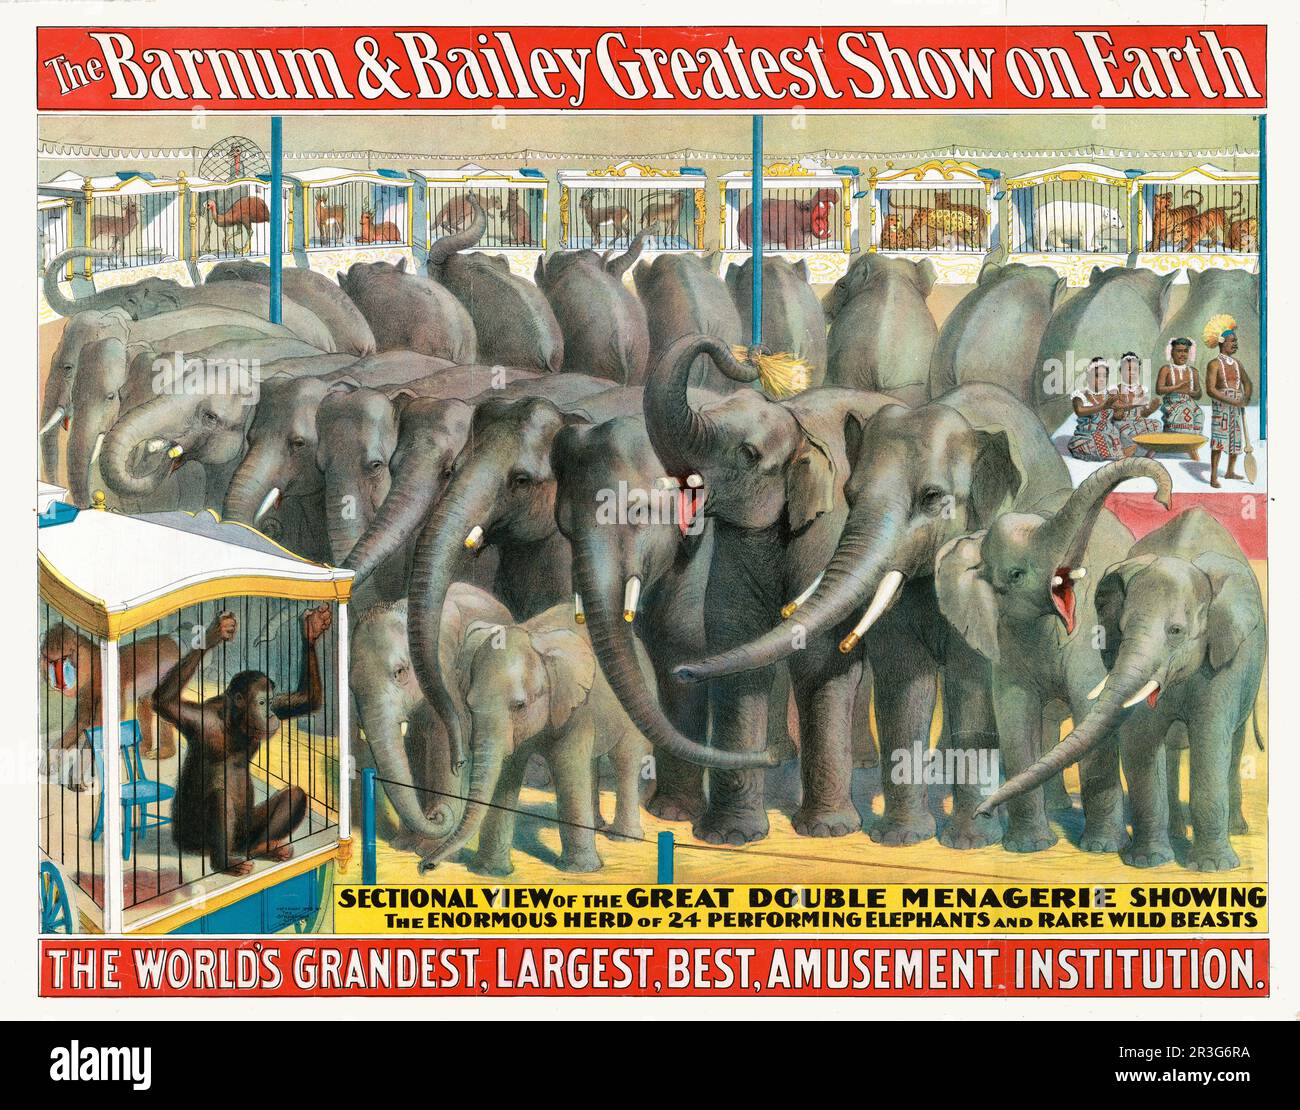 Vintage Barnum & Bailey circus poster showing elephants and animals in cages, circa 1895. Stock Photo